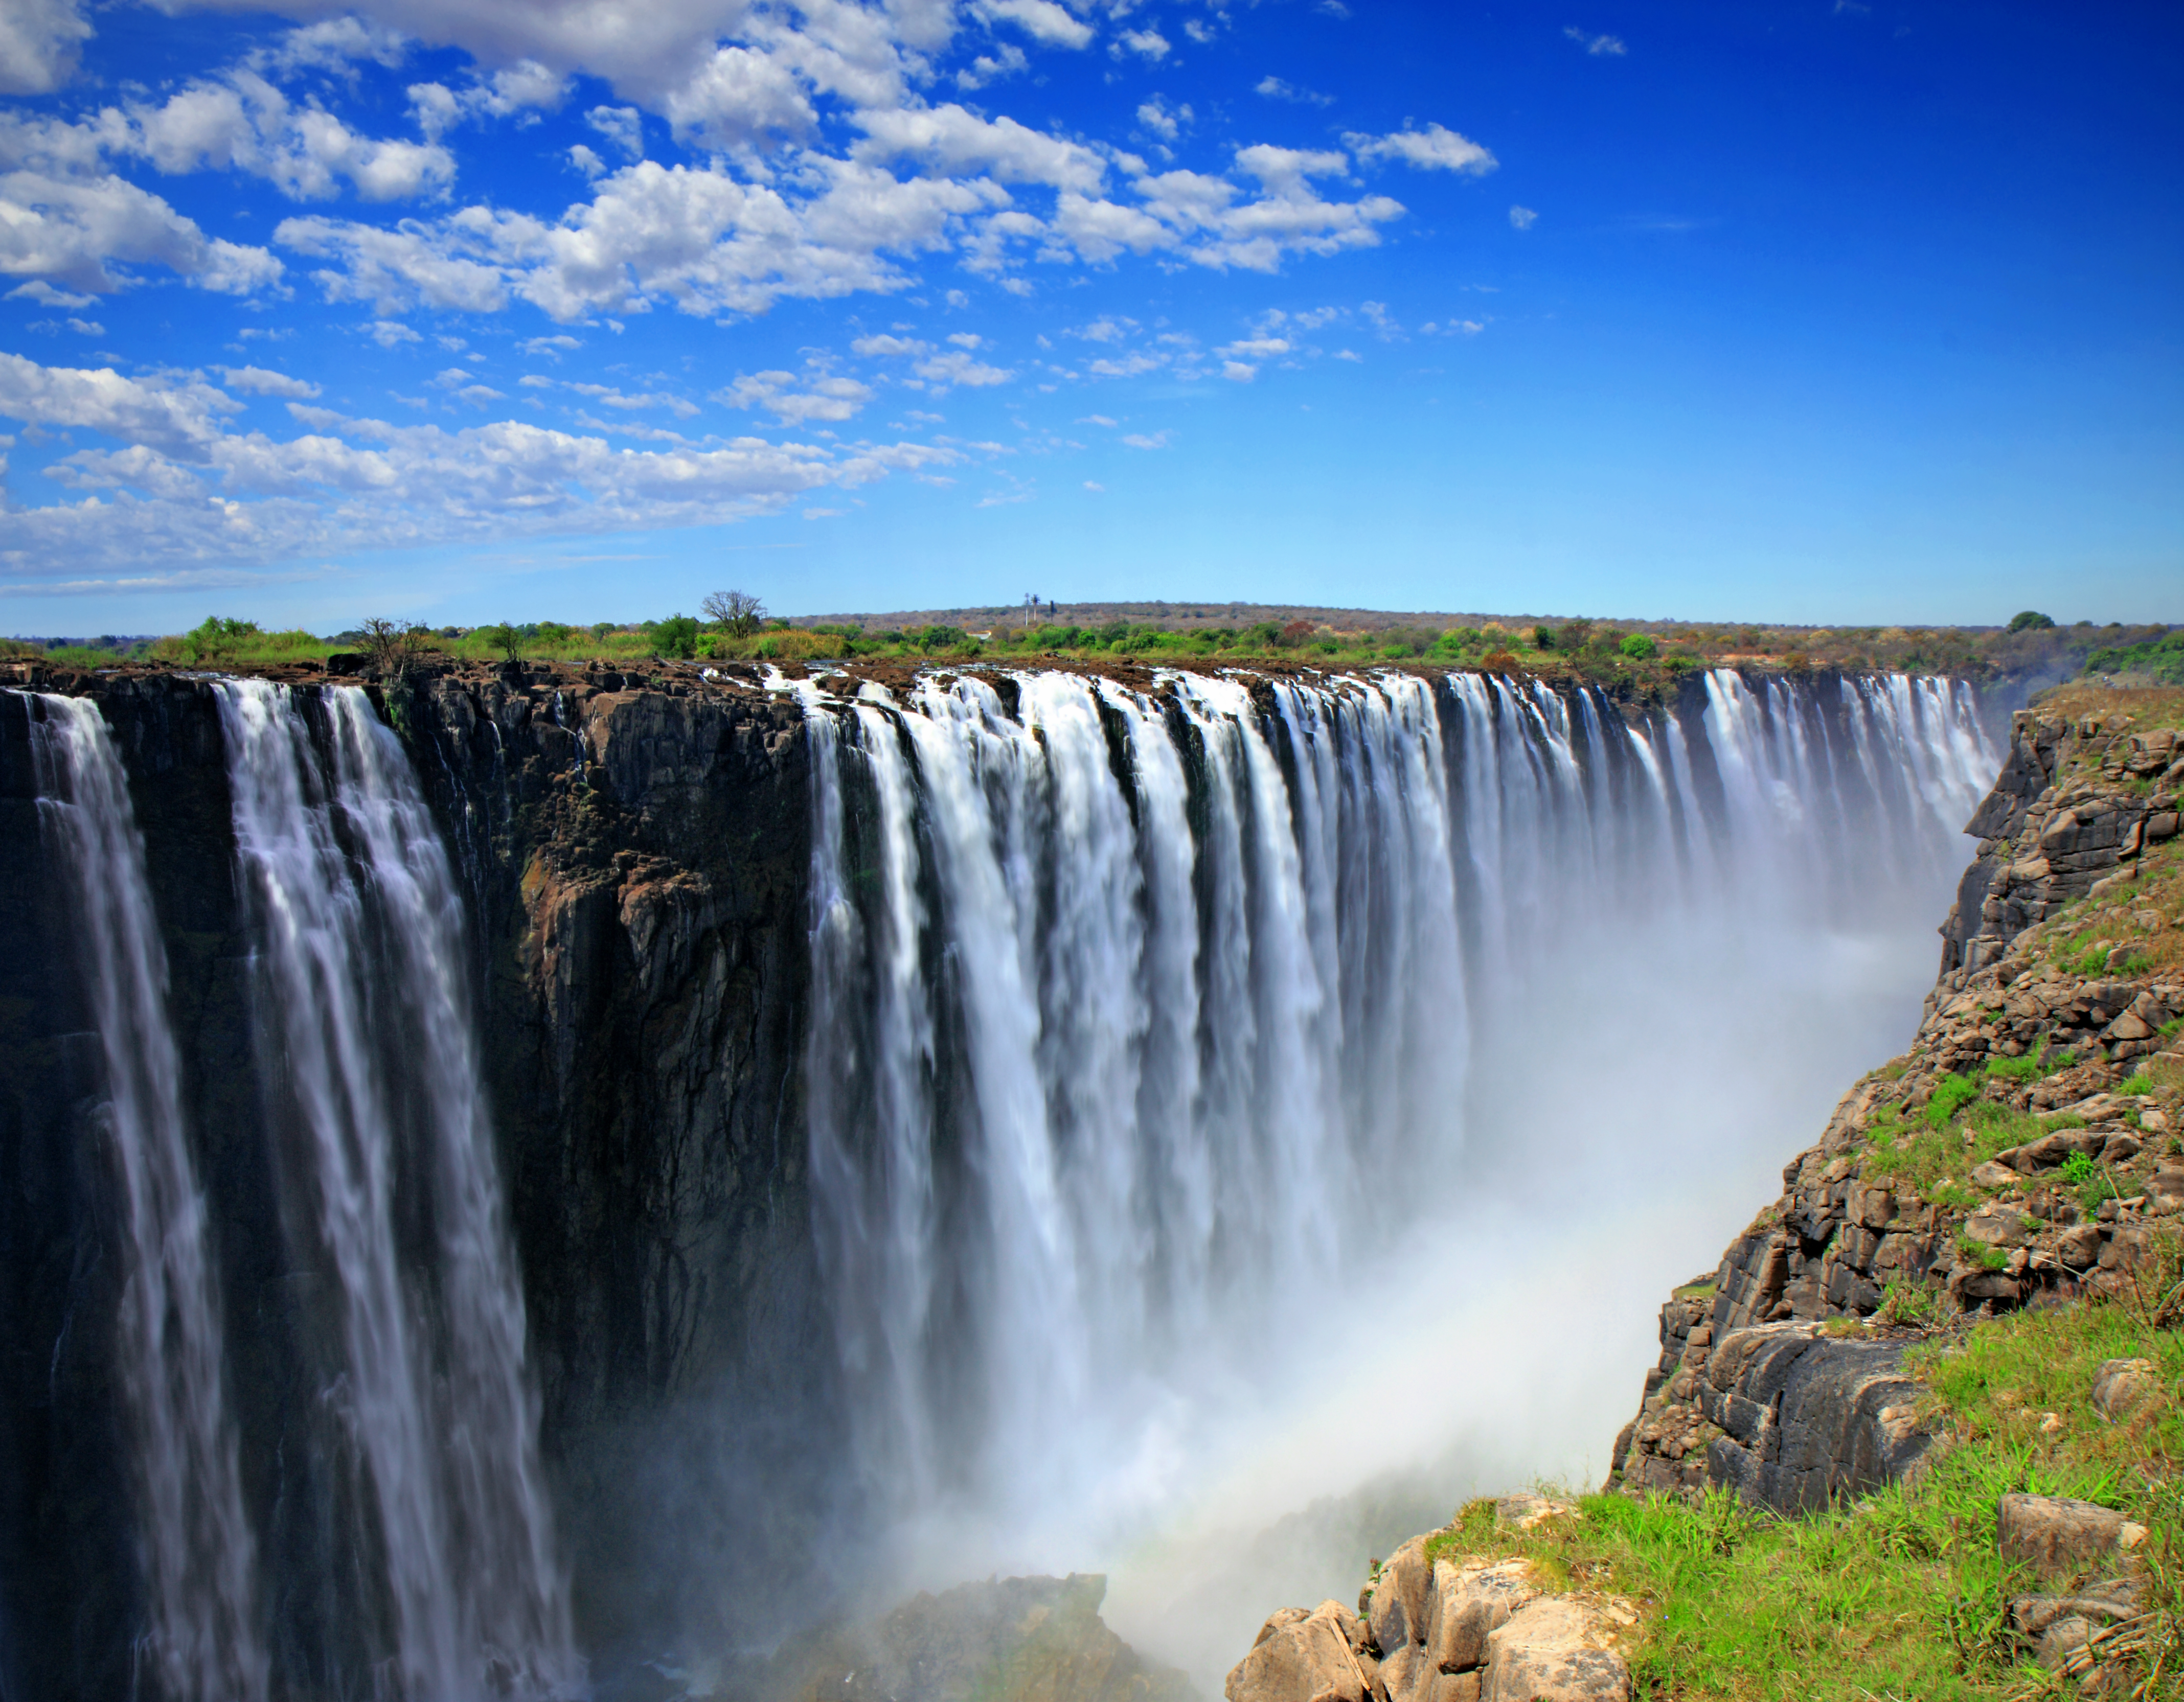 Visit These Epic Gorgeous African Destinations During a Family Vacation - Victoria Falls